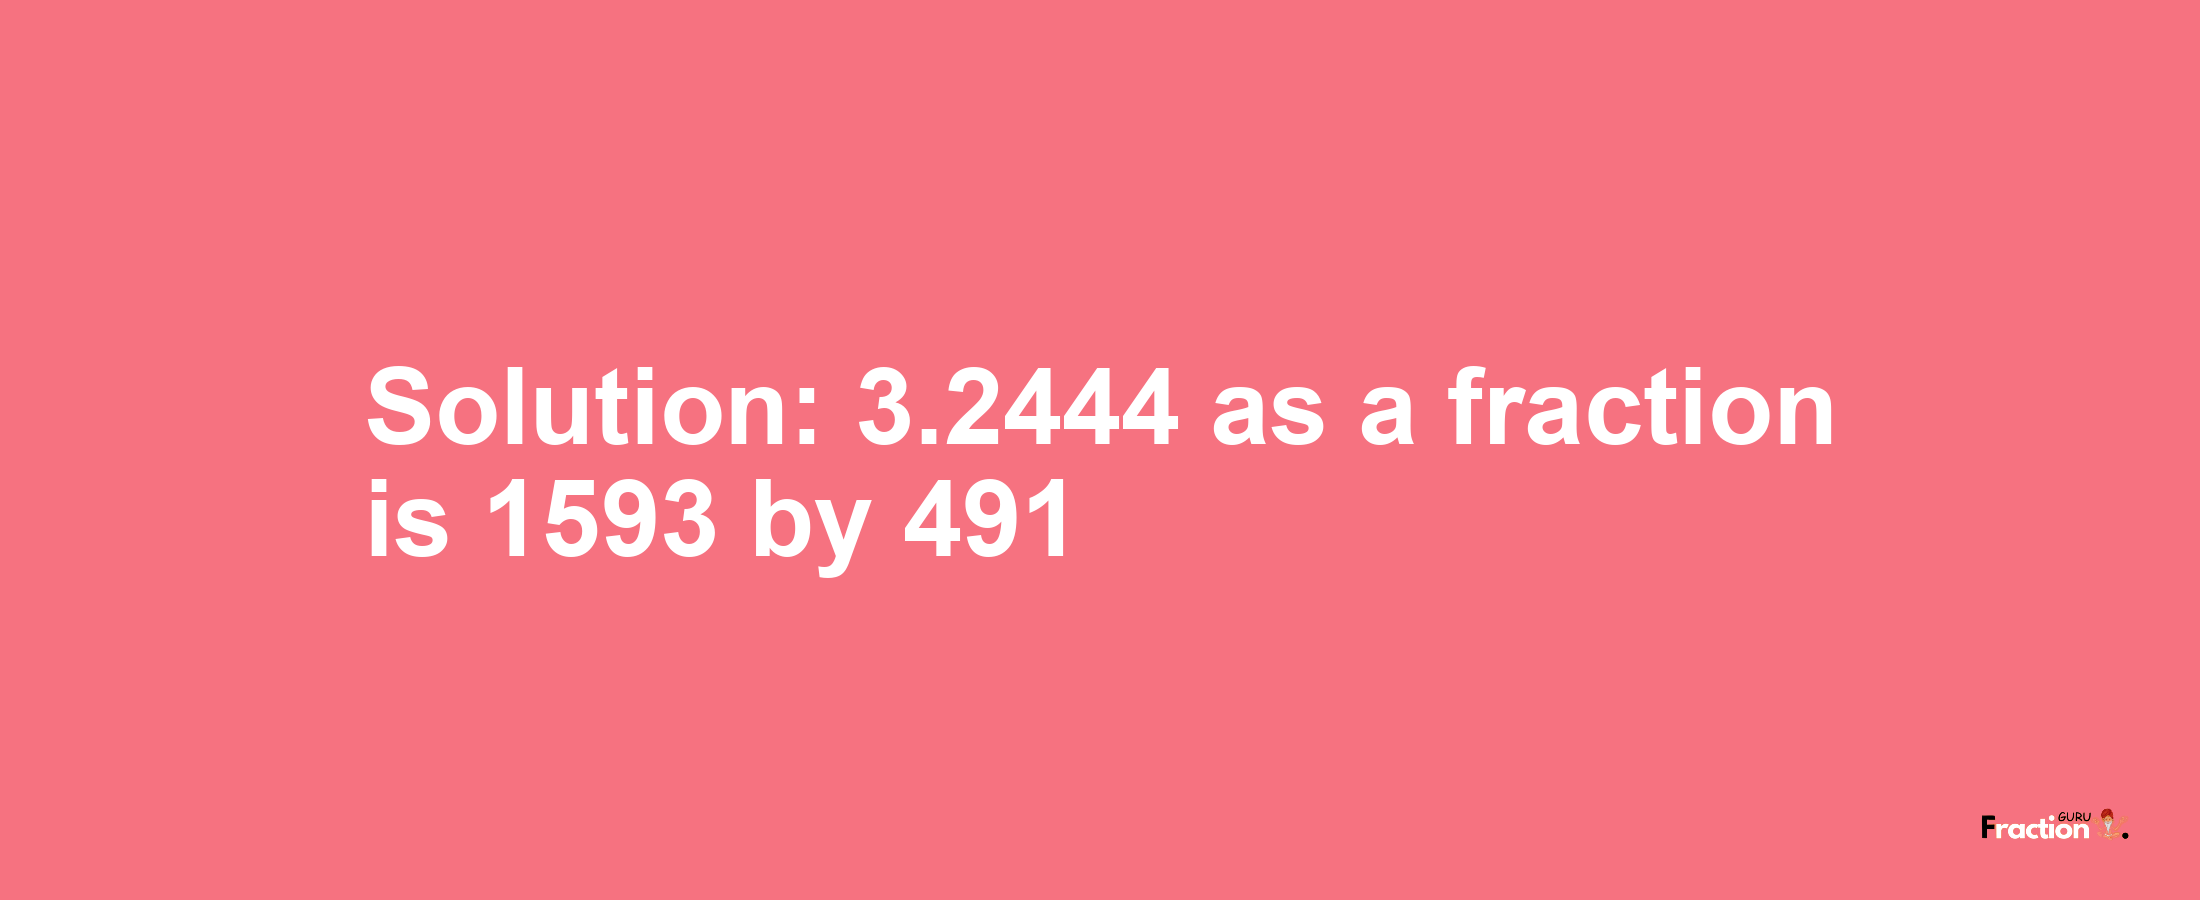 Solution:3.2444 as a fraction is 1593/491